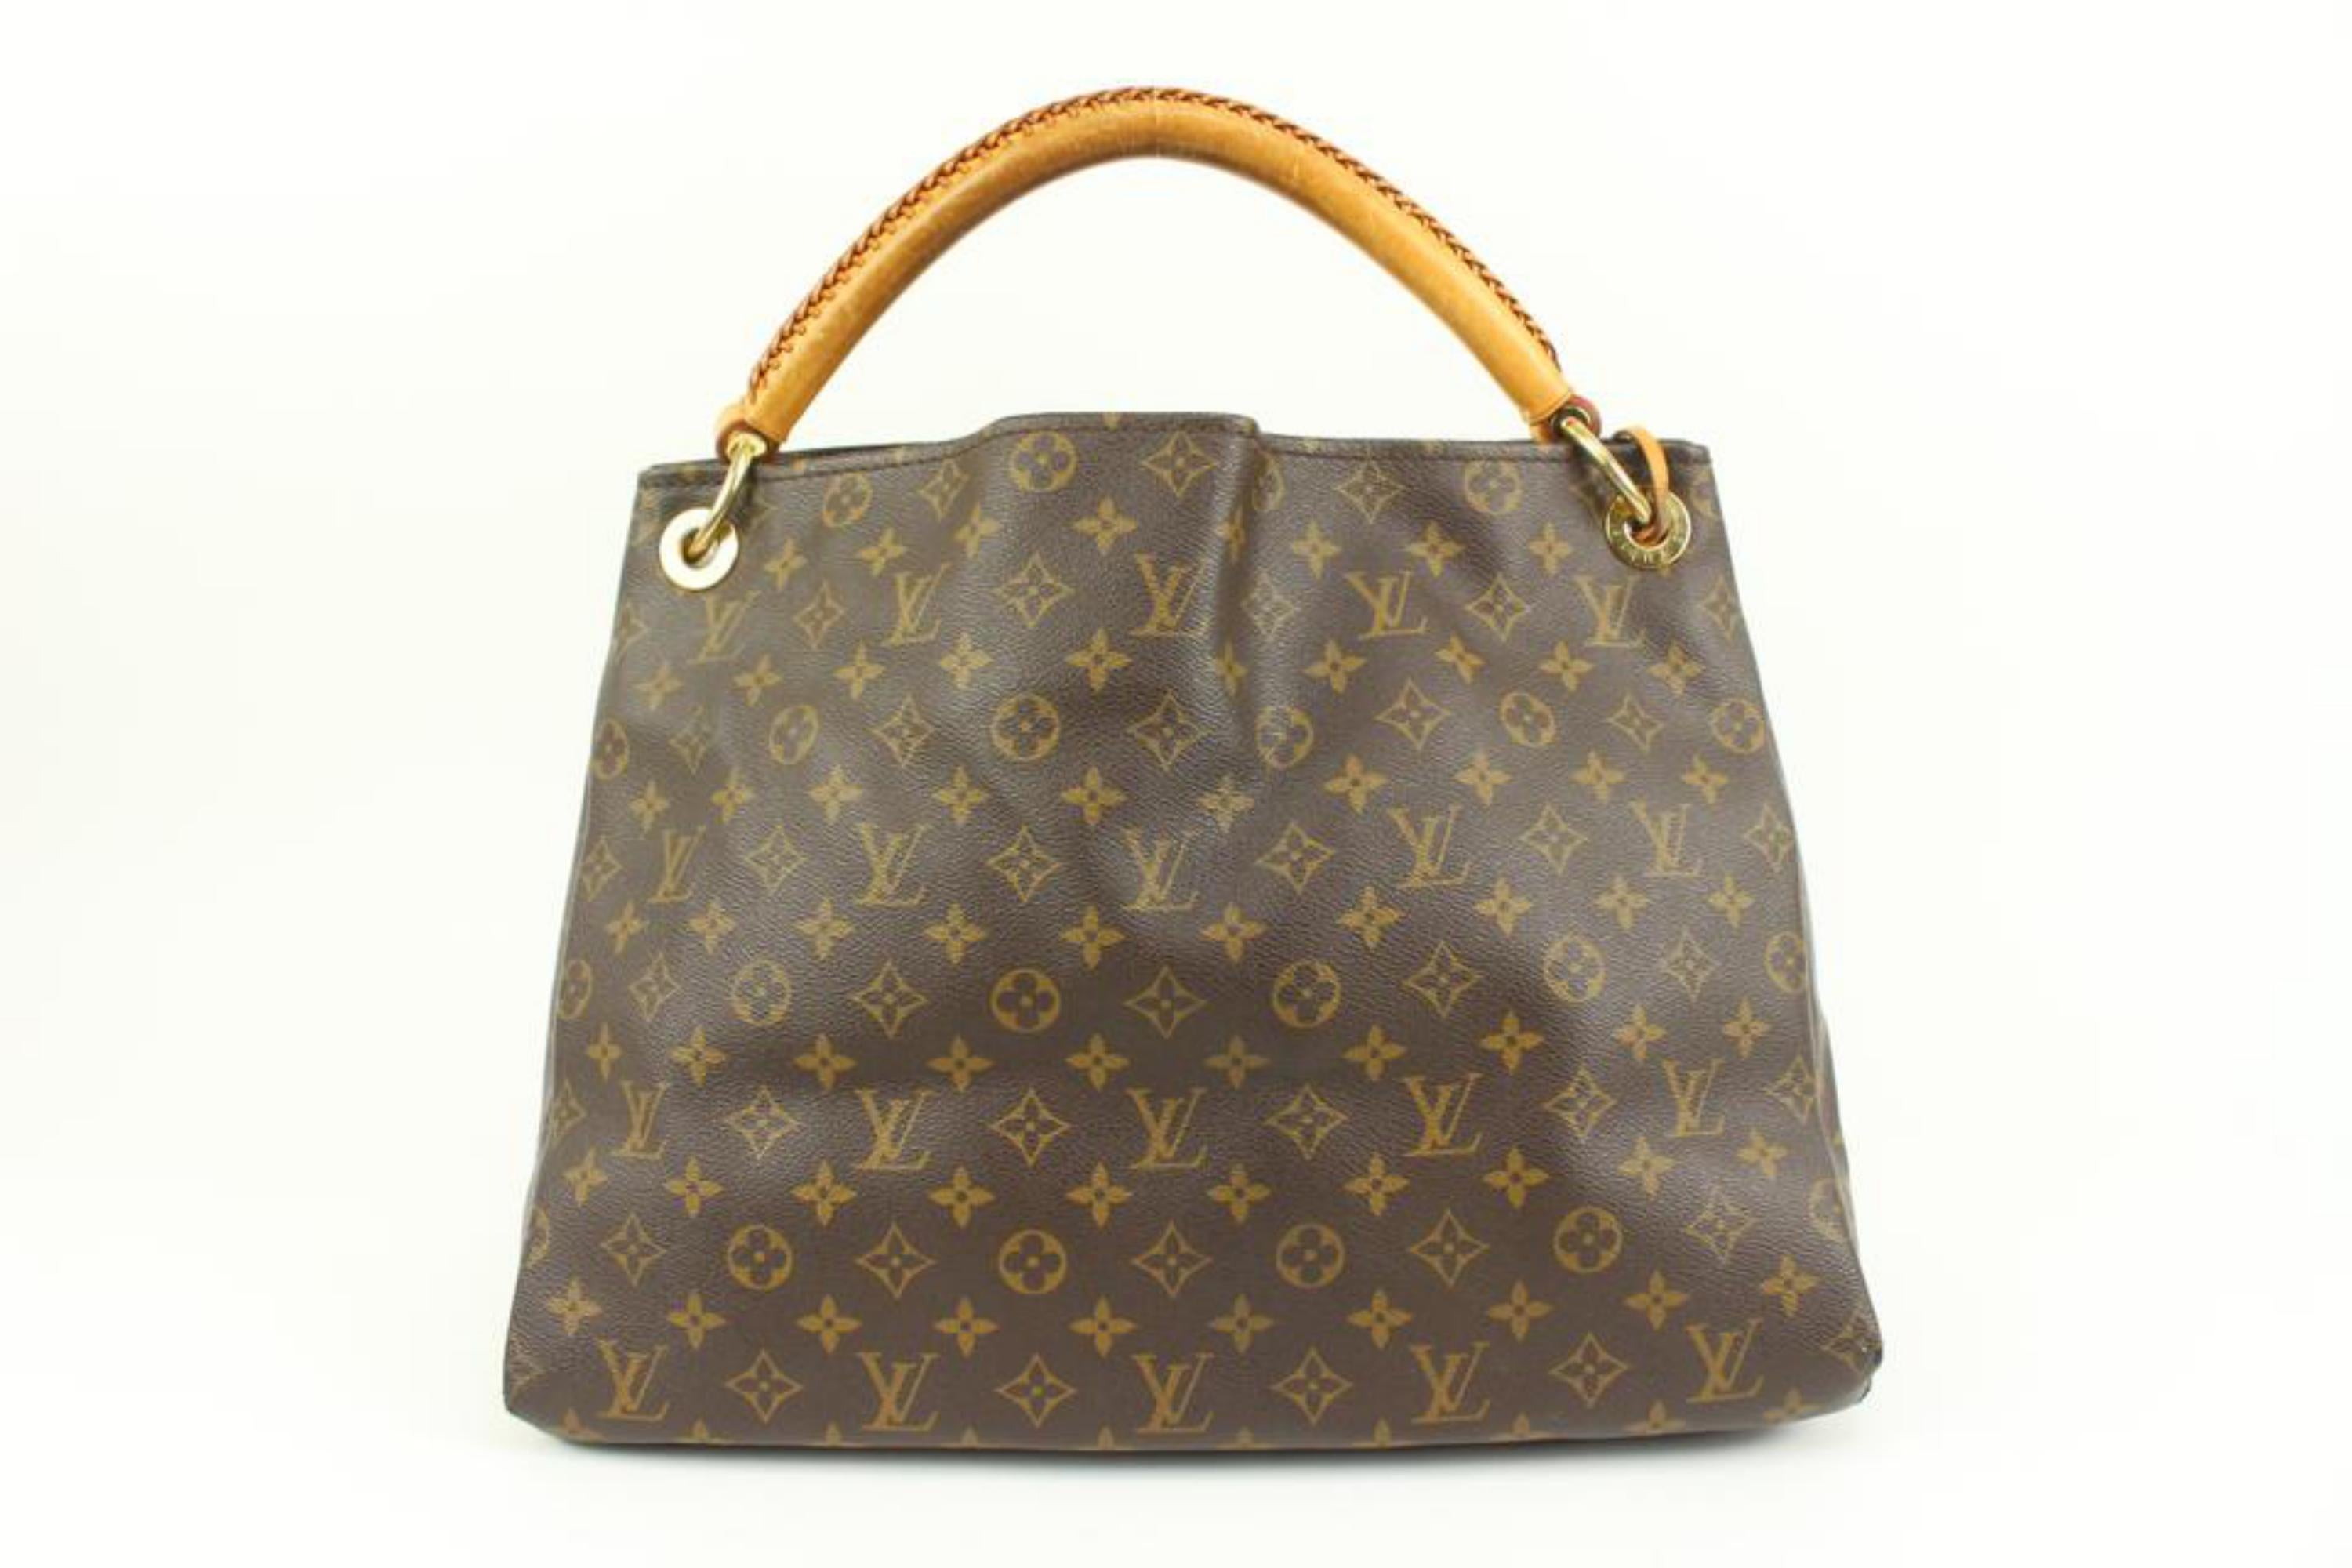 Louis Vuitton Monogram Artsy MM Hobo Bag 66lk322s In Good Condition For Sale In Dix hills, NY